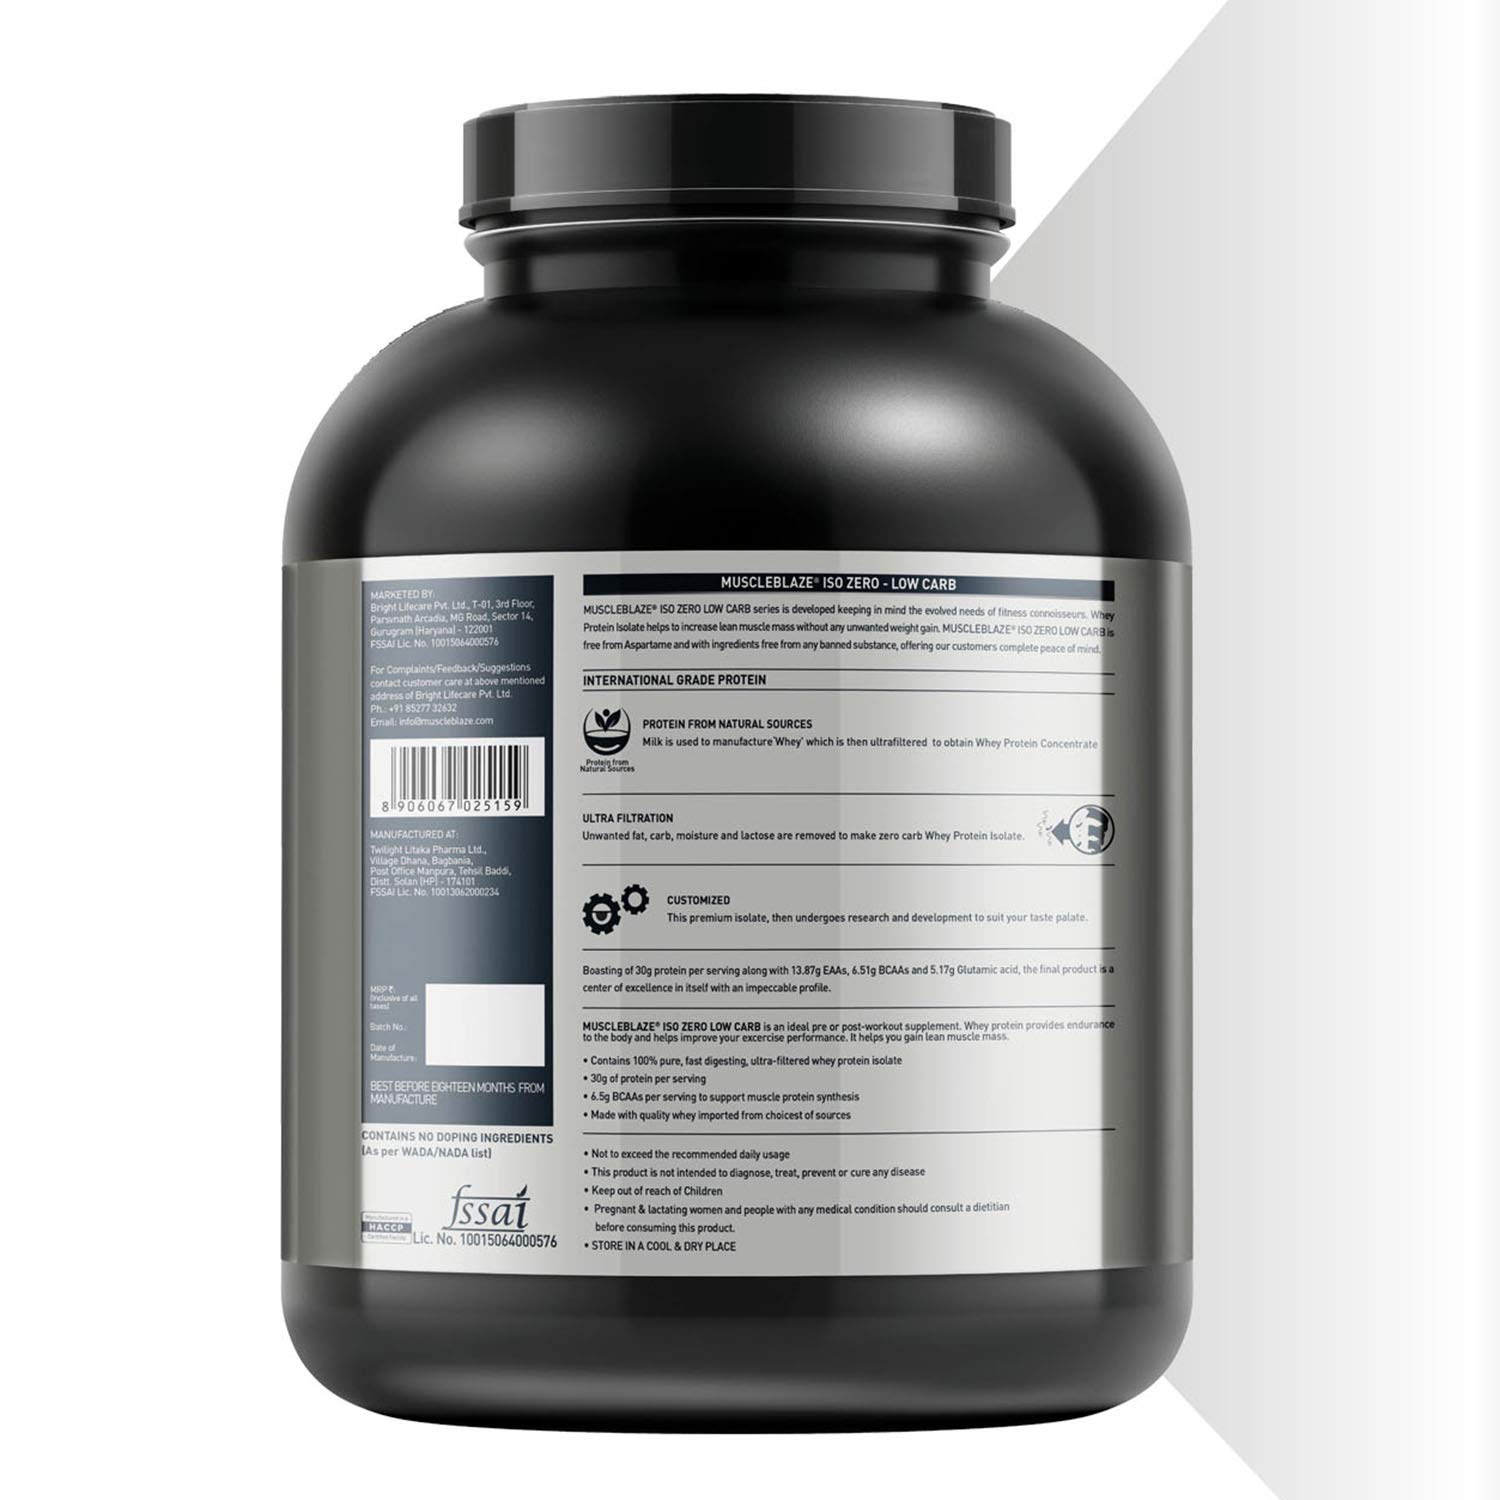 Image Of Muscleblaze Iso-Zero Low Carb Whey Protein Isolate Beast Nutrition